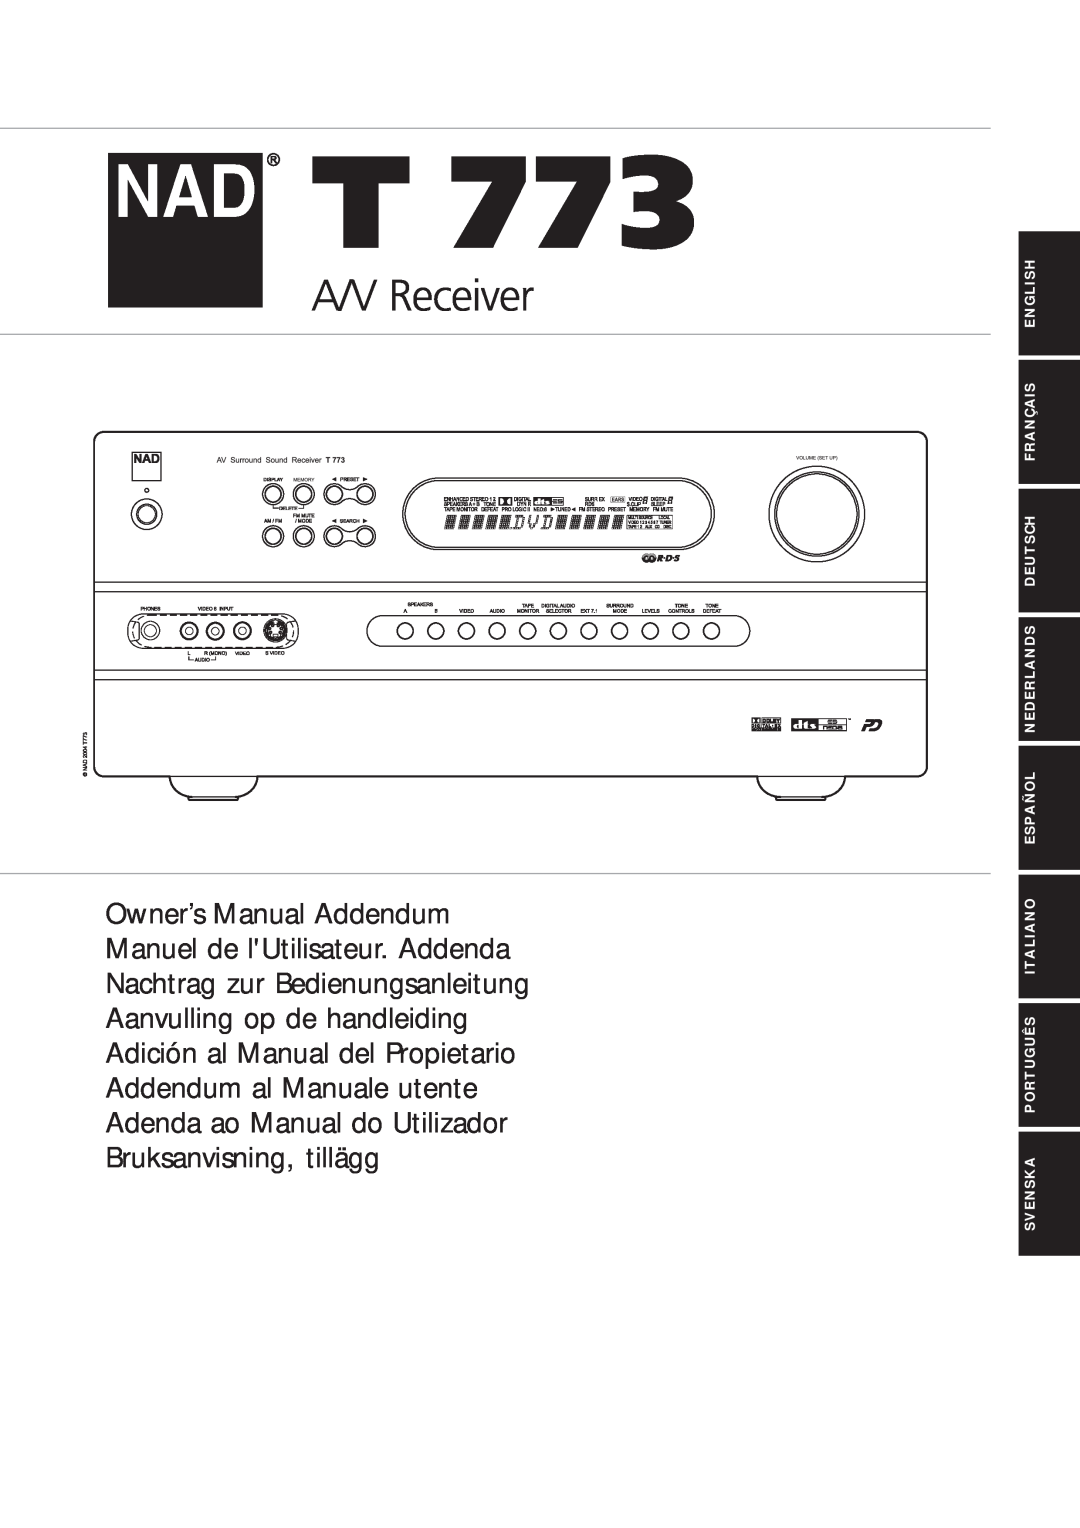 NAD T 773 owner manual 